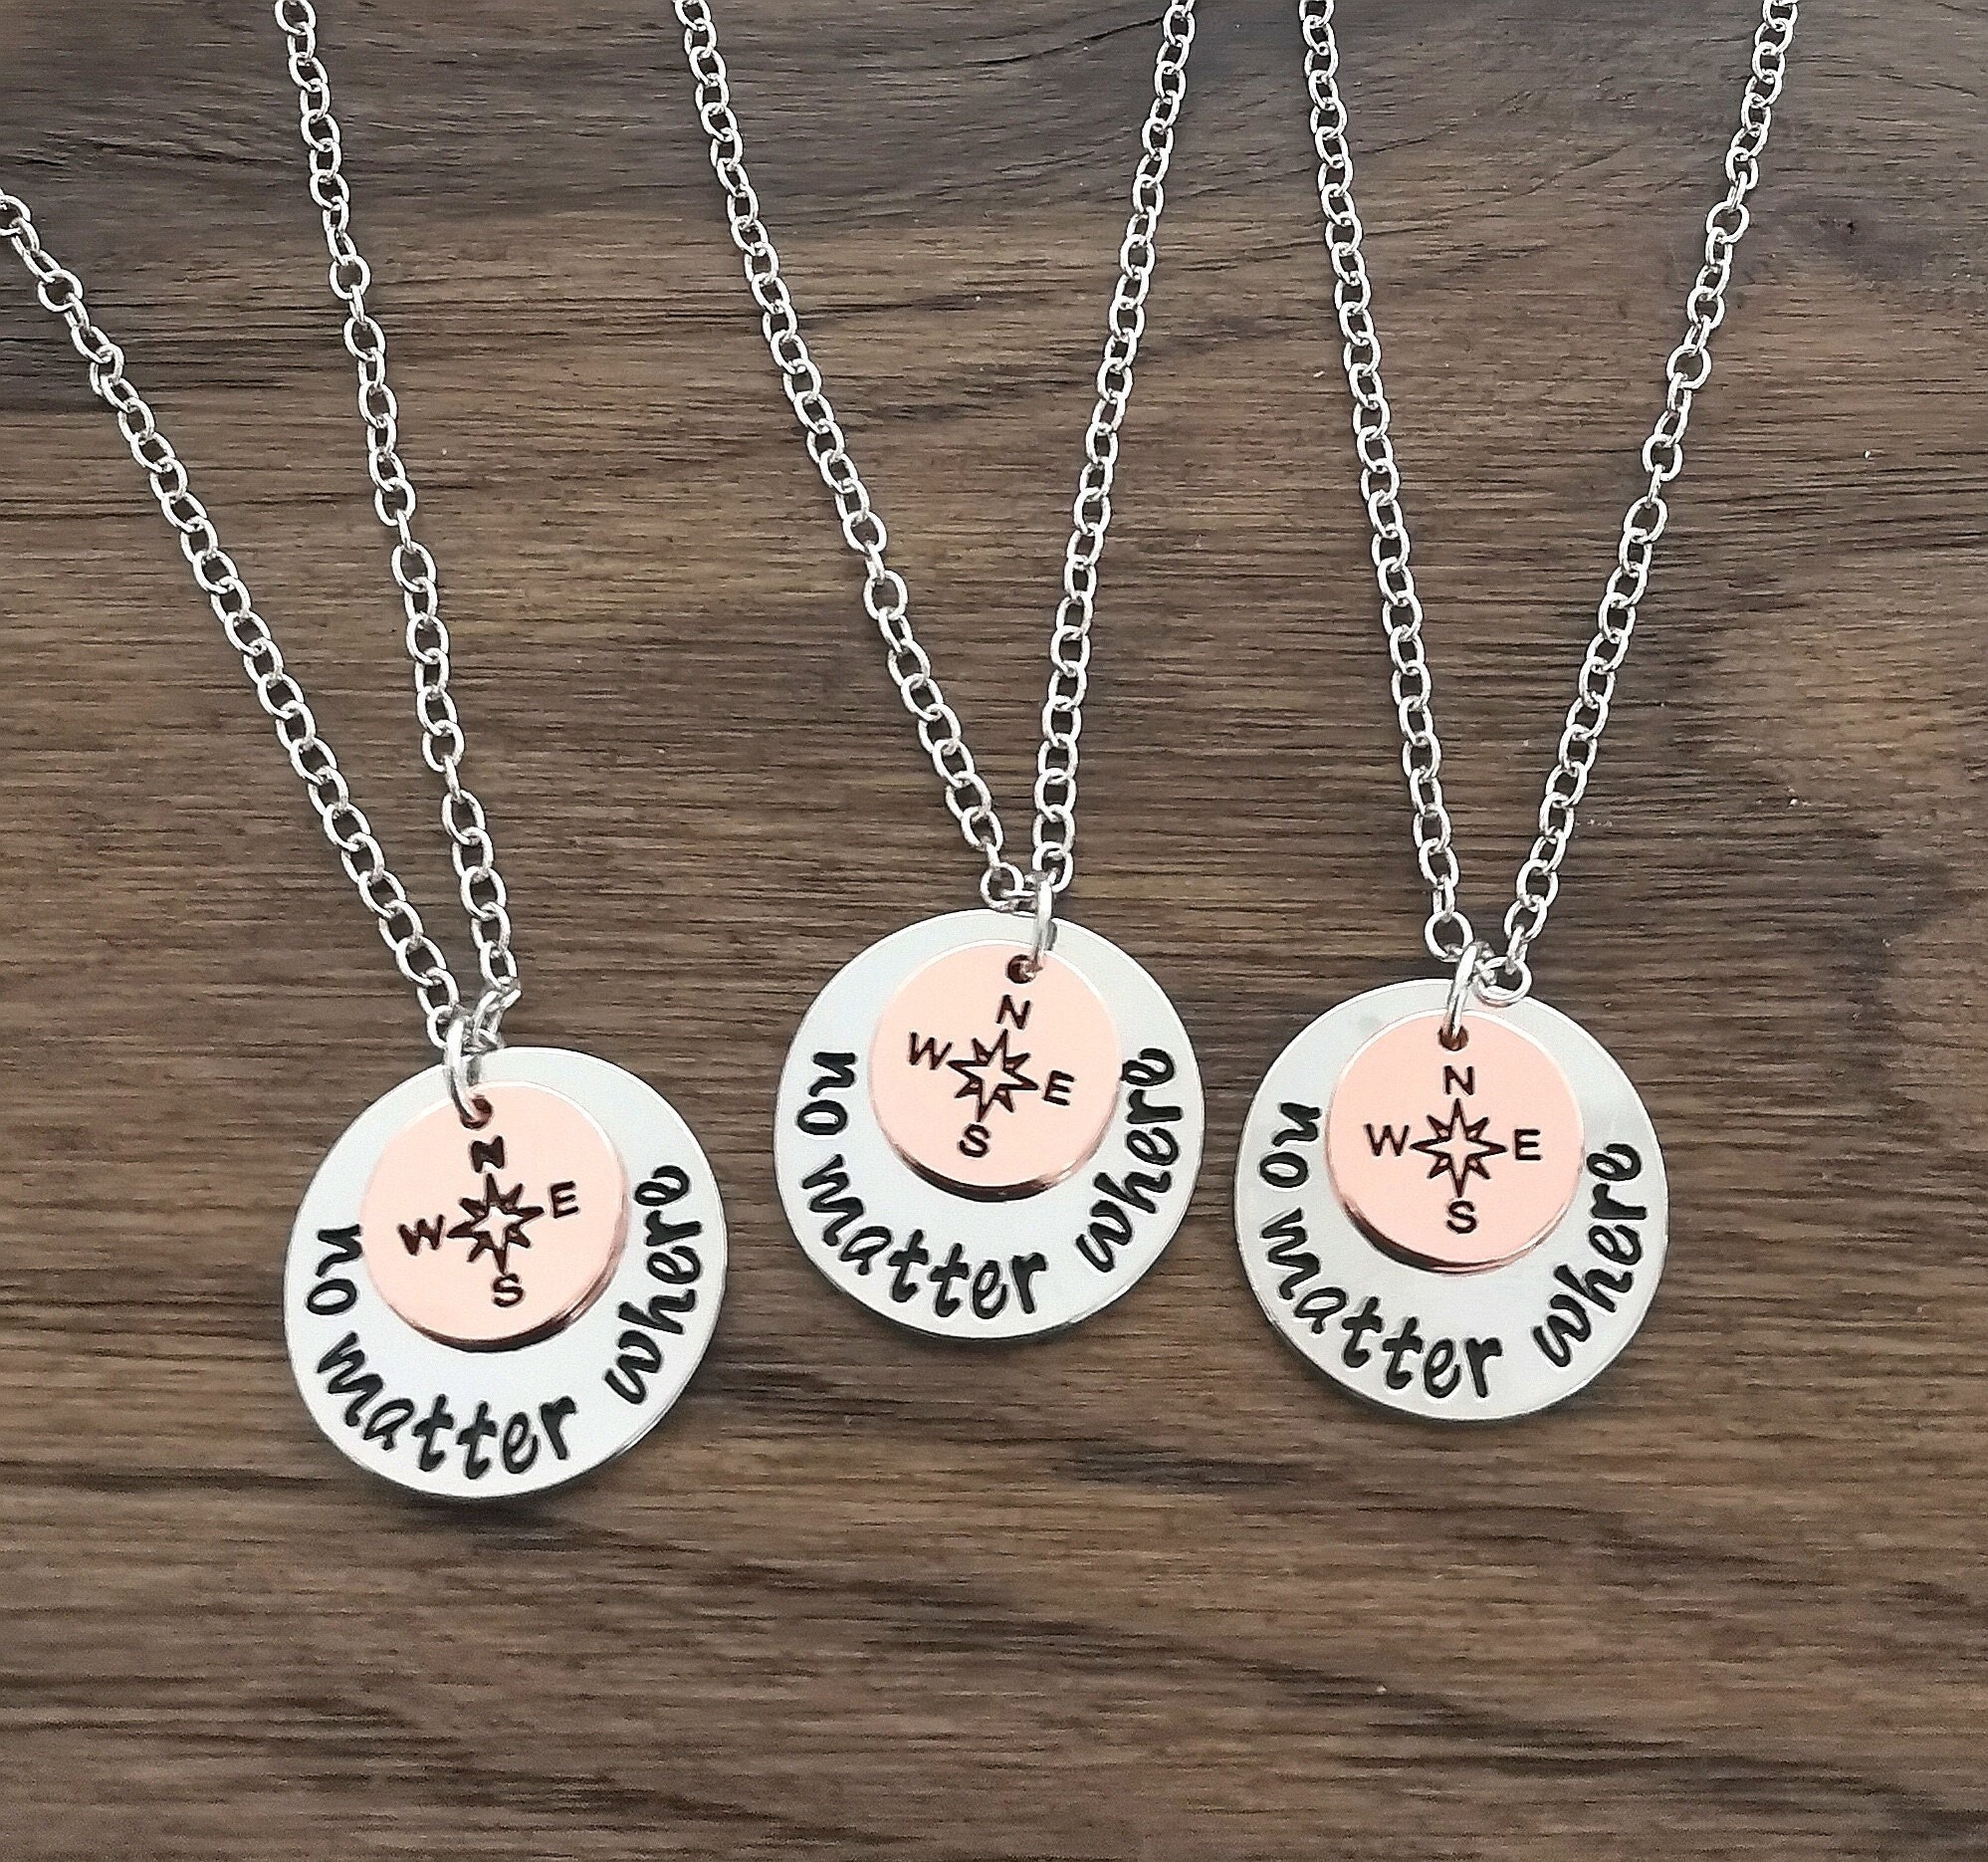 Personalized Joining Heart BFF Friendship Necklaces (4 Necklaces